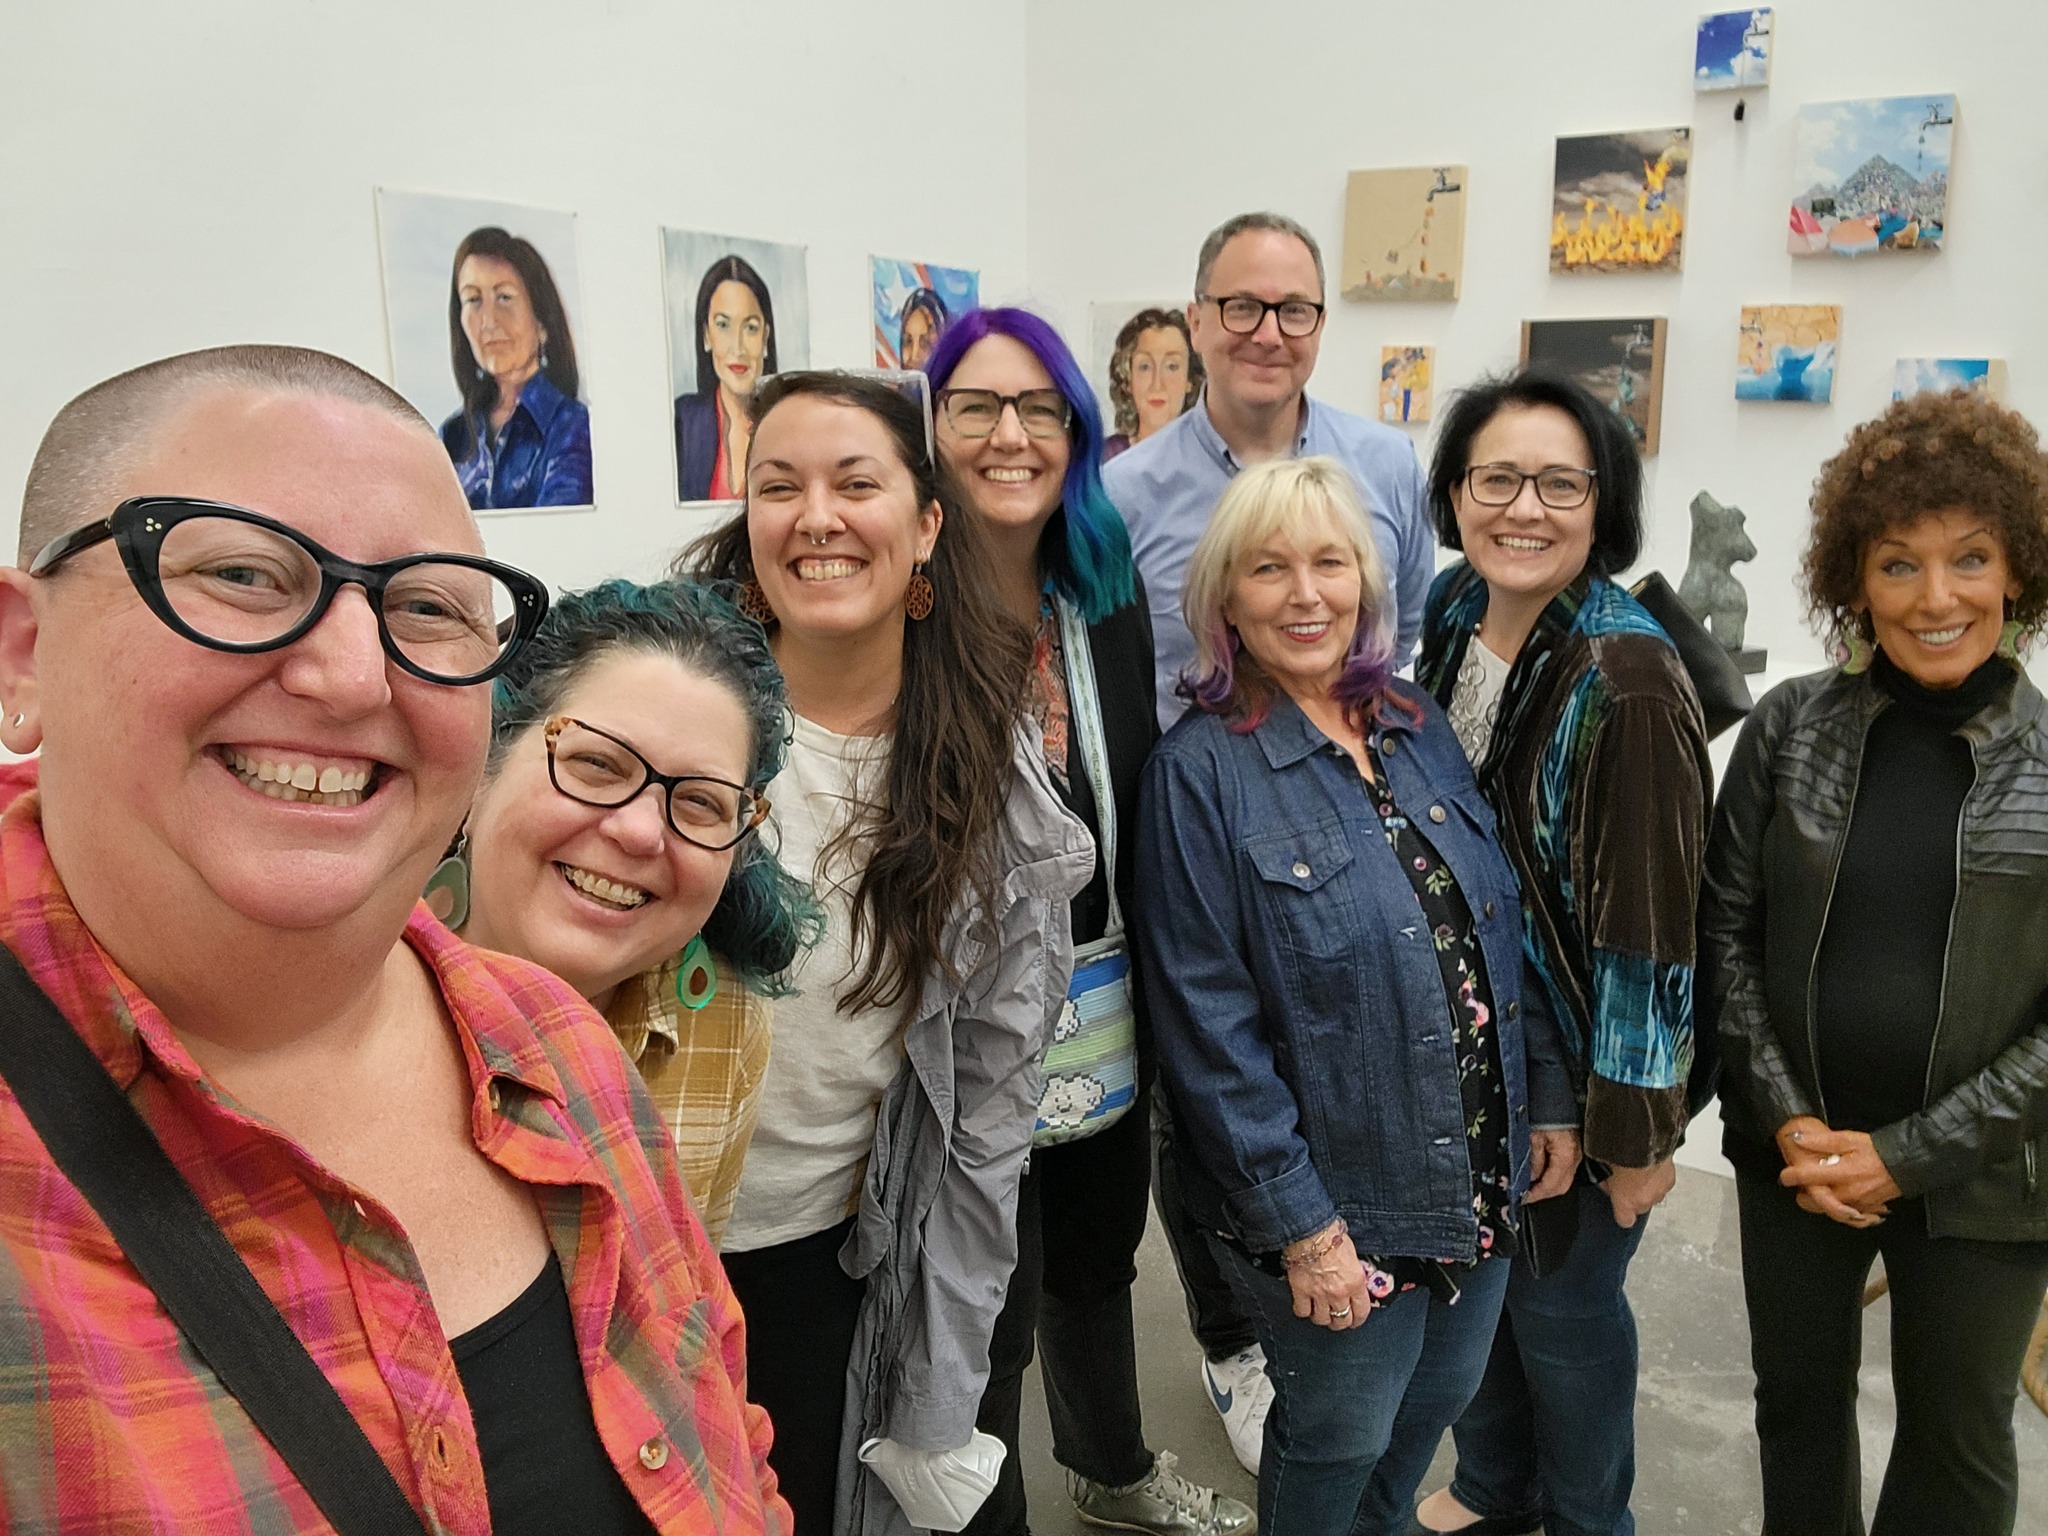 Eight people smiling at the camera, gathered at an art gallery